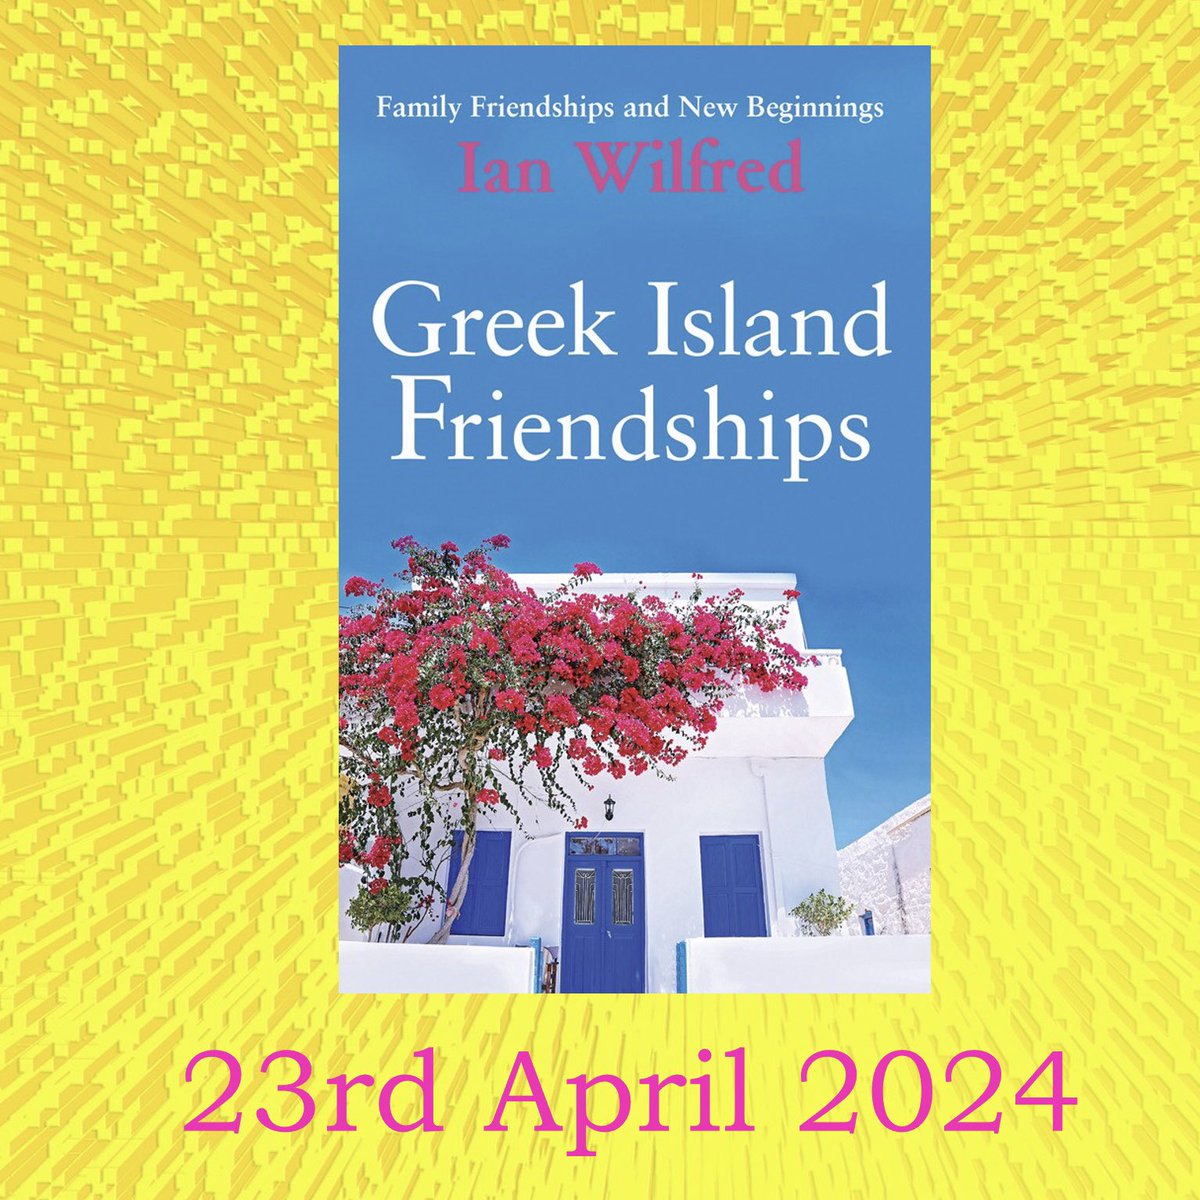 ☀️OUT NEXT WEEK☀️ Greek Island Friendships Family and friends have been brought together on the island of Vekianos but not everyone wants to be there… secrets romance and new beginnings Kindle unlimited - 99p/99c Kindle UK Amazon.co.uk/dp/B0CW1MQZXG US Amazon.com/dp/B0CW1MQZXG